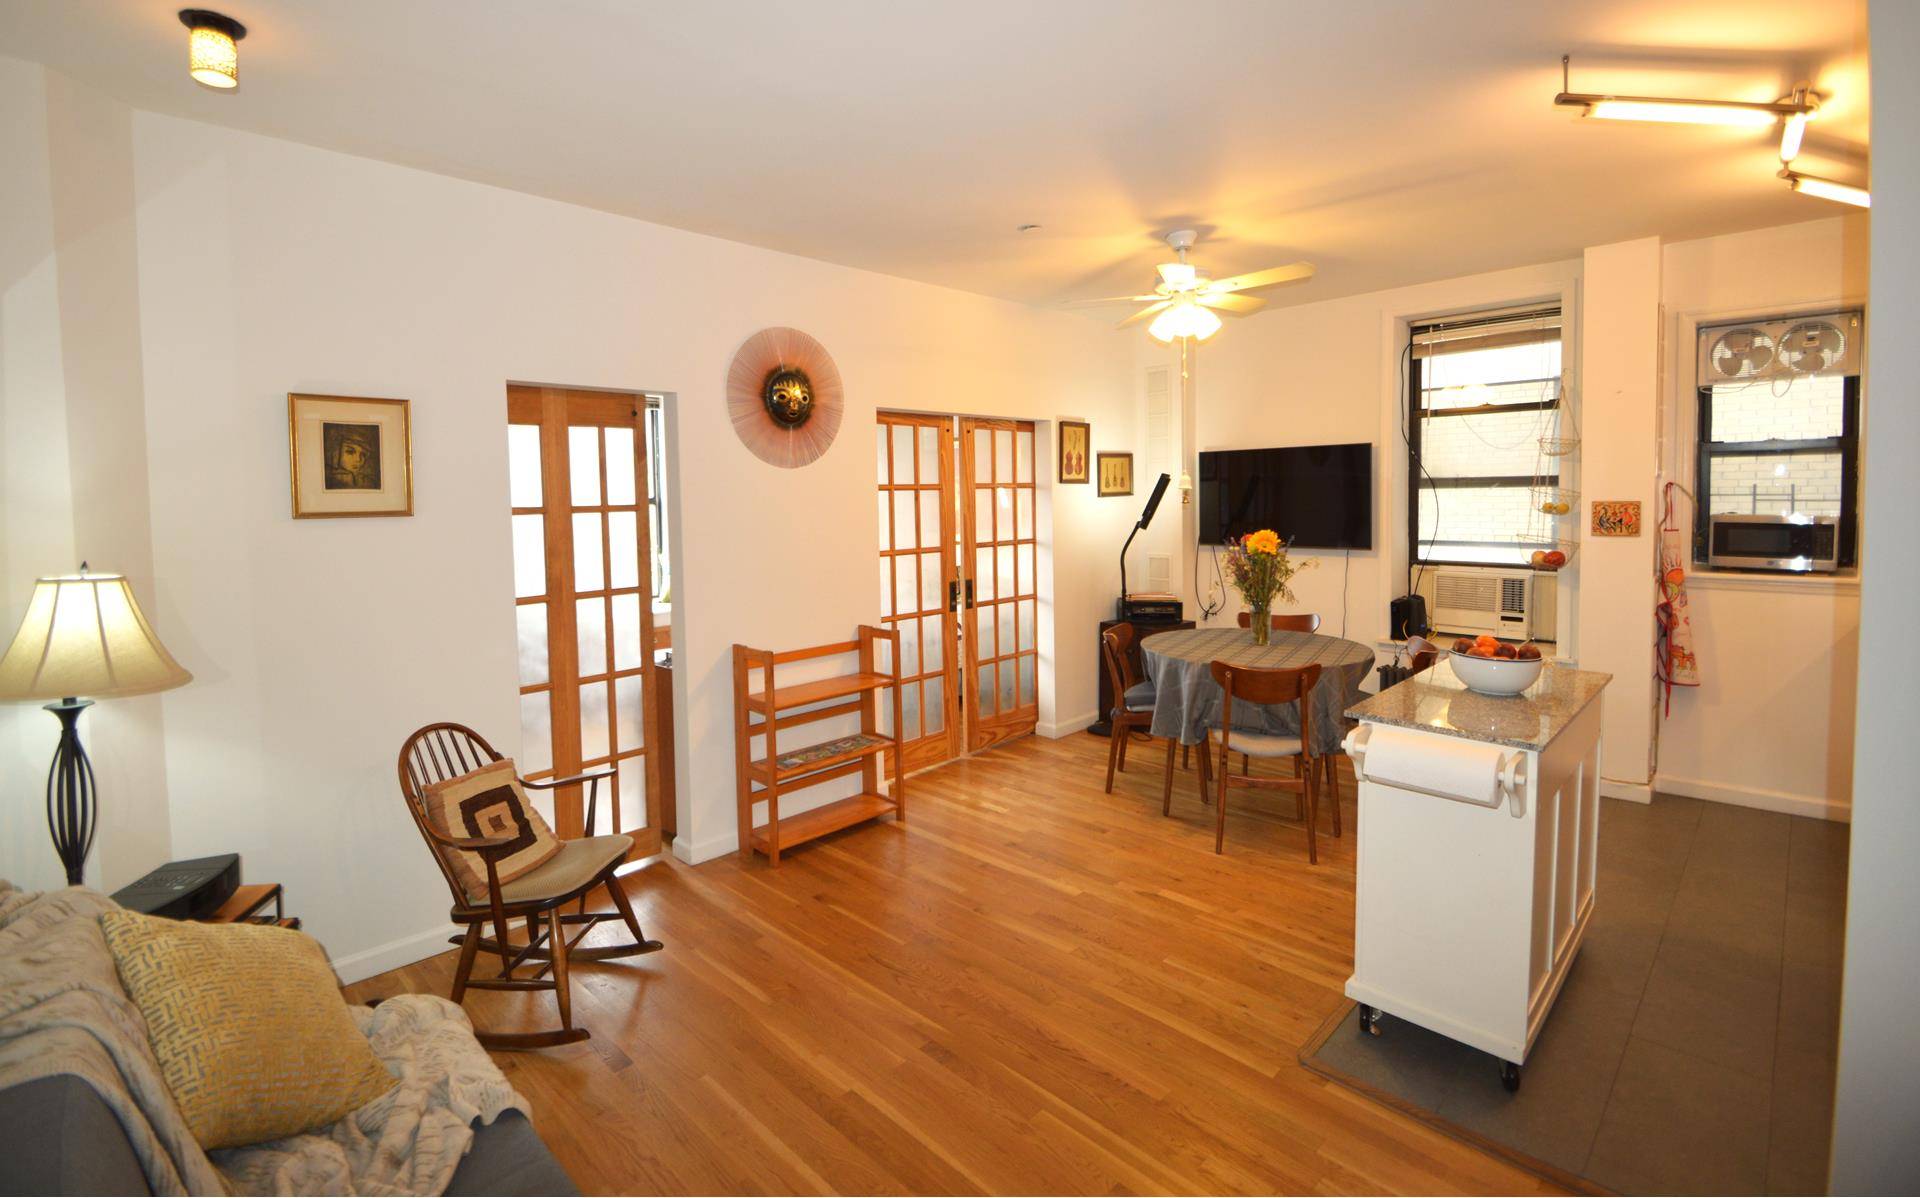 This spacious One Bedroom One Bathroom apartment is located in the residential Washington Heights neighborhood.